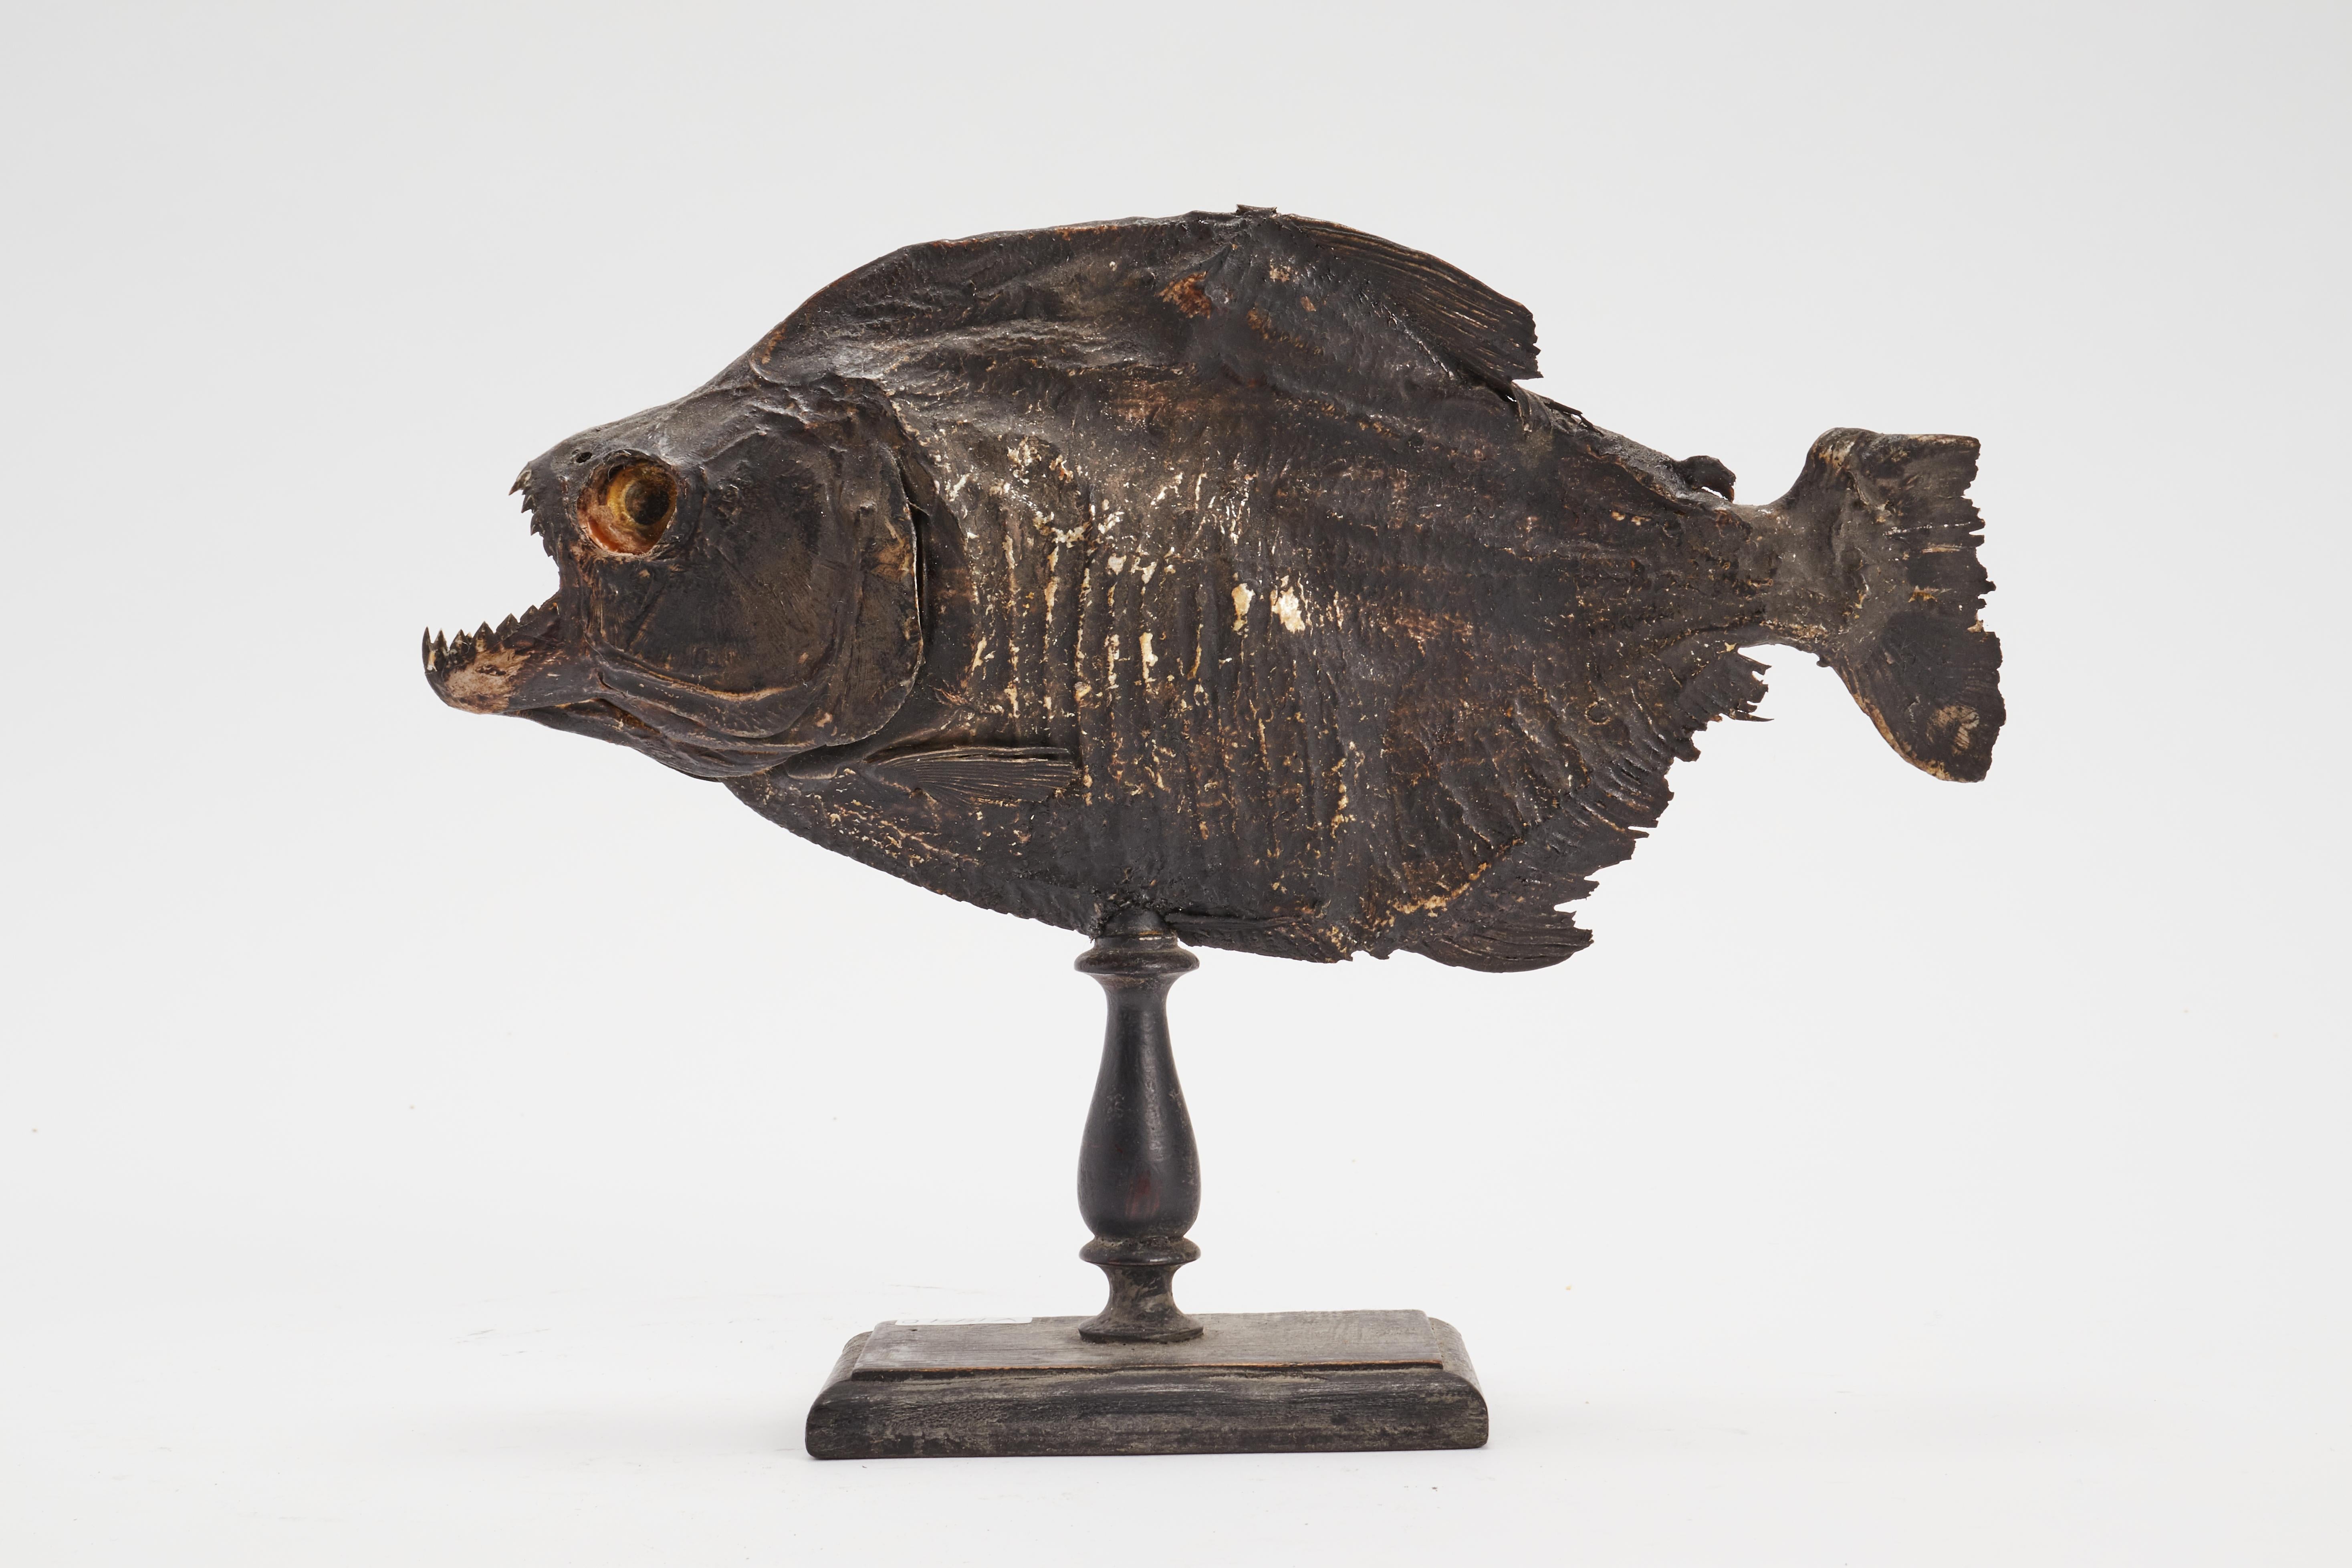 Taxidermy marine natural Wunderkammer specimen, embalmed Piranha fishes (Serrasalmus Brandtii). The Specimen is stuffed and mounted over a lacquered wooden base black color, Italy, circa 1880.